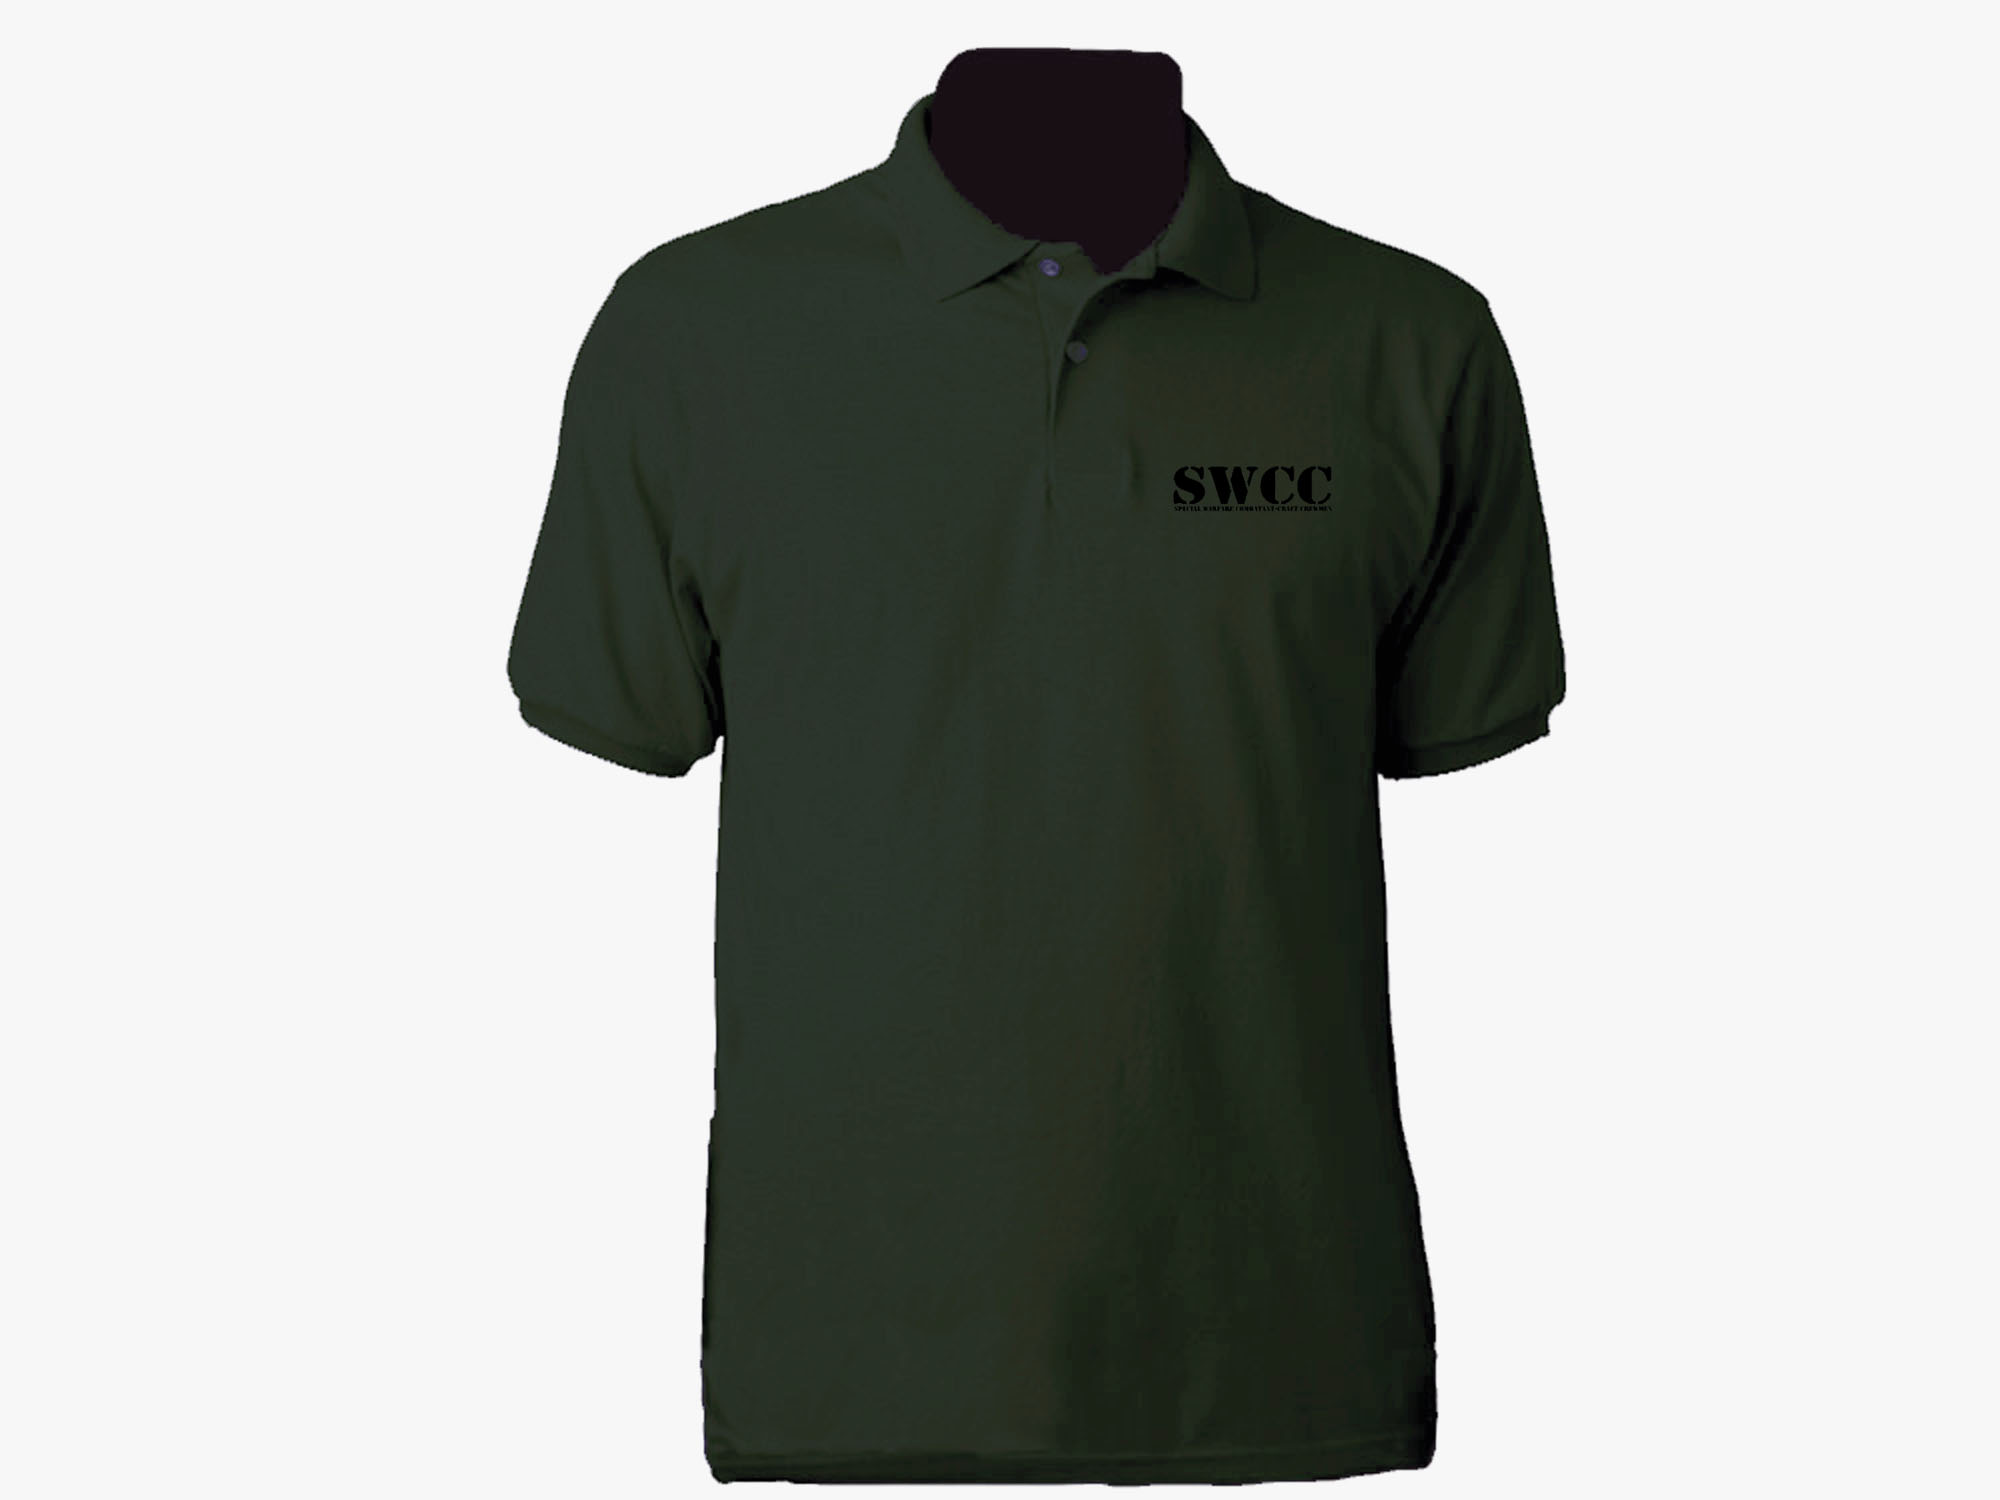 SWCC sweat proof polo style t shirt US Navy's special warfare combatant-craft crewmen